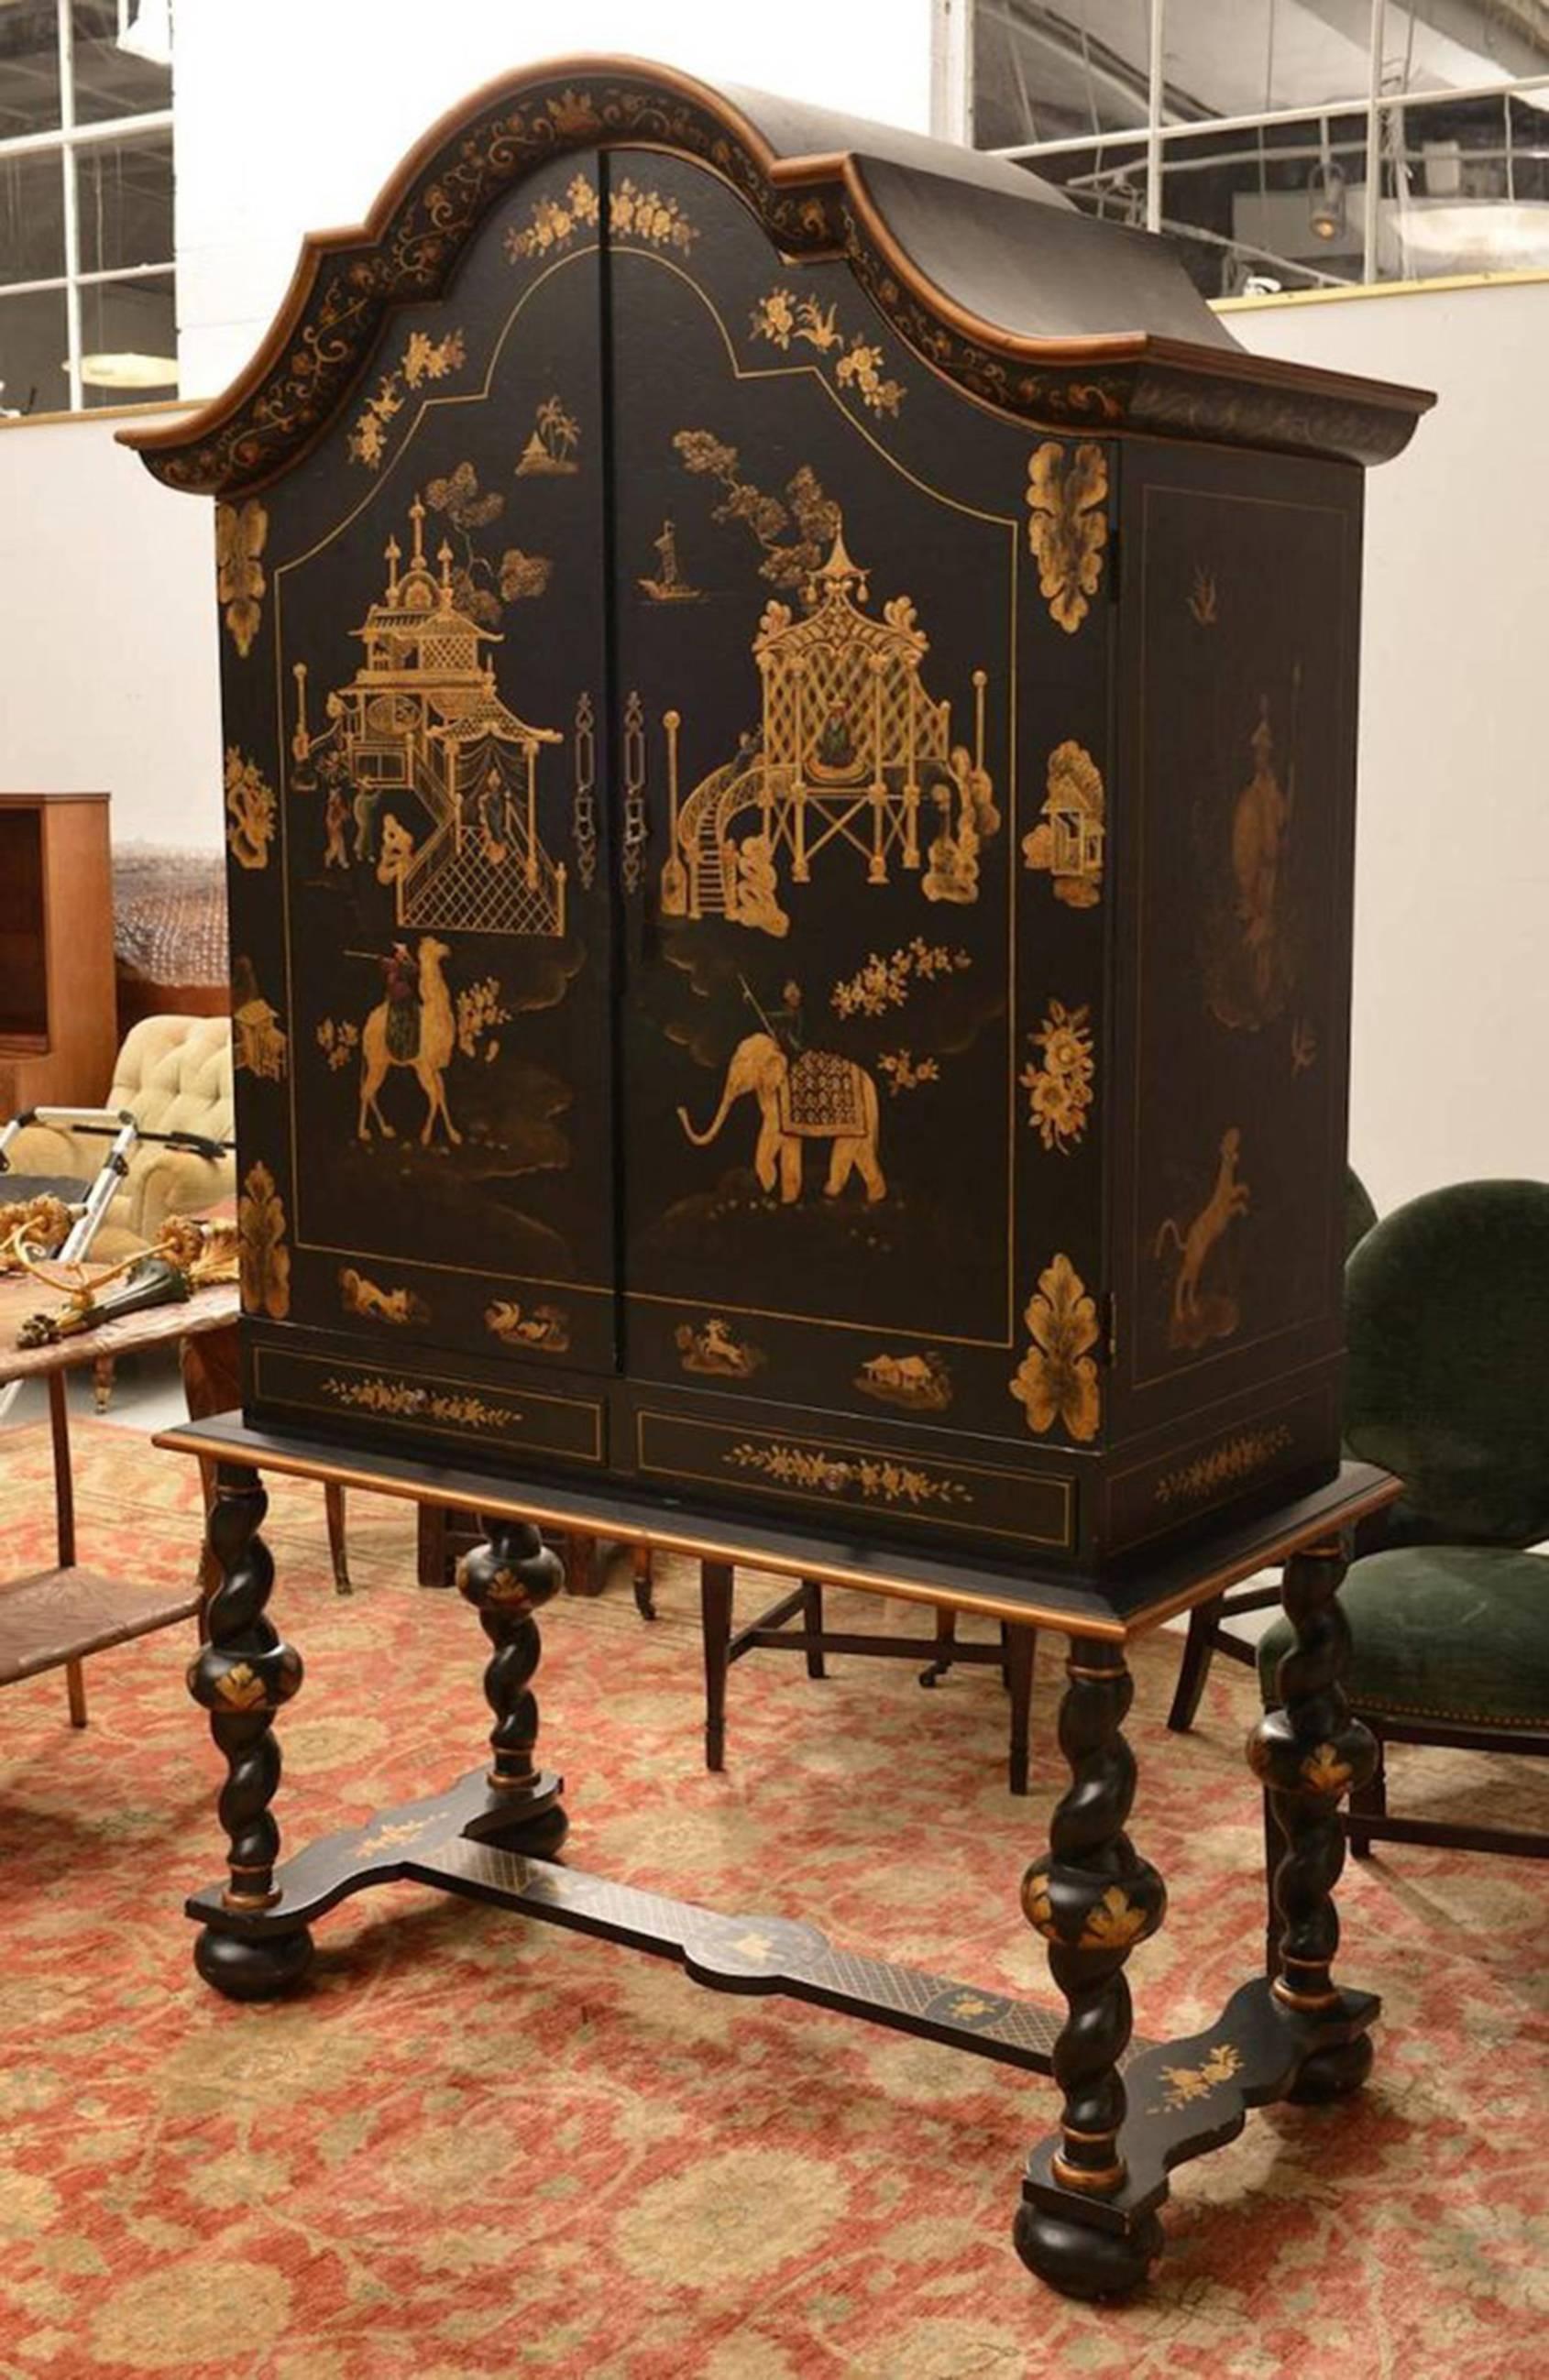 A Substantial Style Gilt Chinoiserie Lacquered Cabinet on Stand, Two Large blind doors decorated with camel & elephant motif. The spacious interior fitted with two drawers, raised on a conforming lower case with barley twist legs